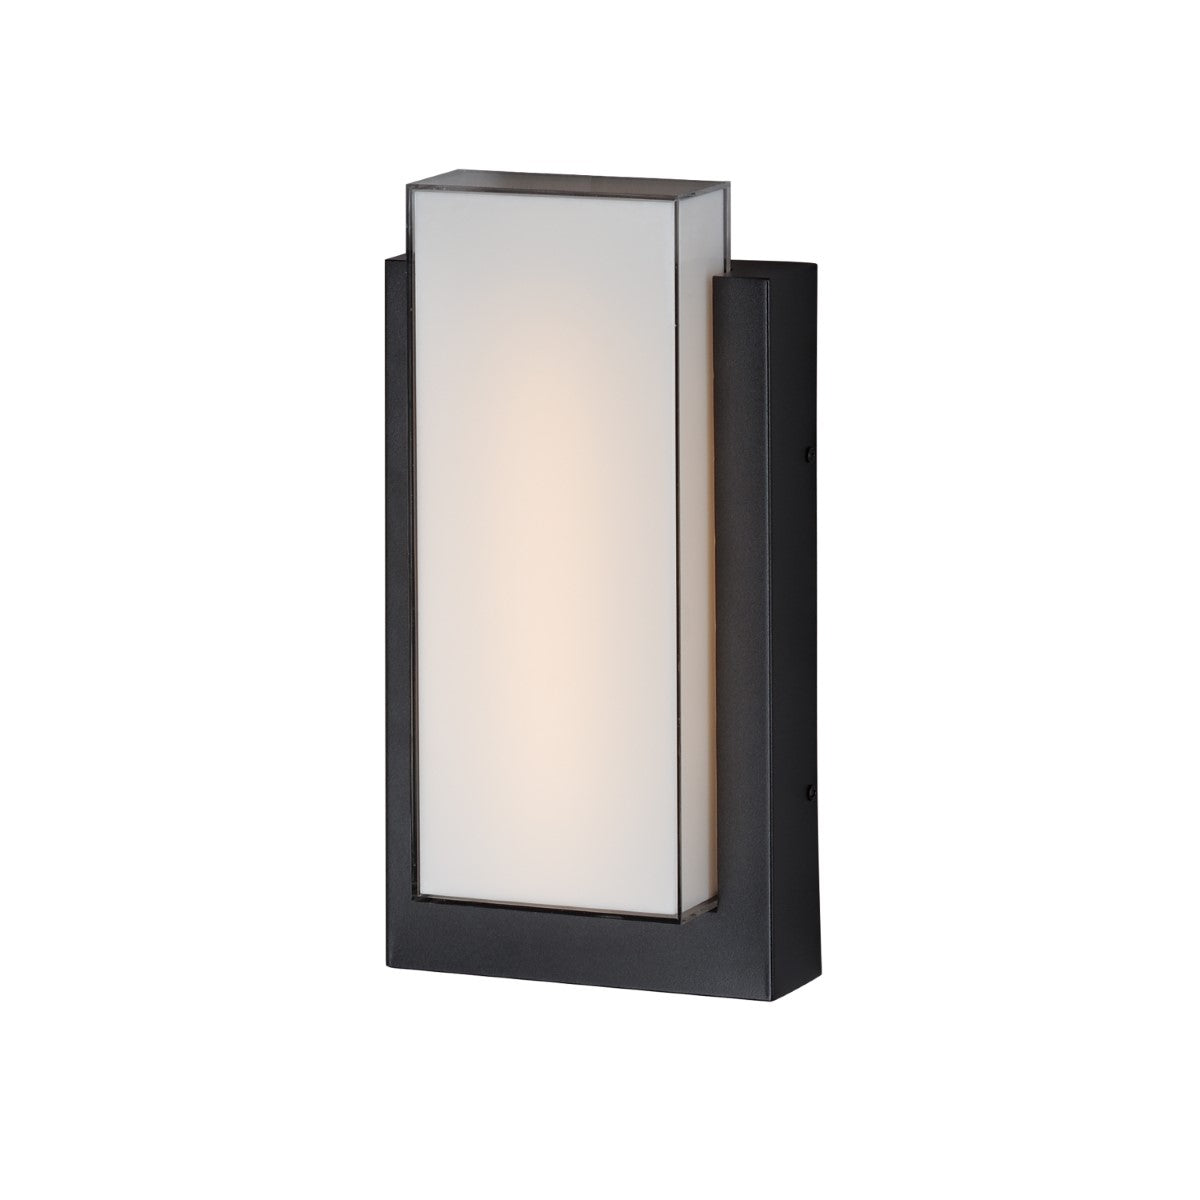 Tower 15 in. LED Outdoor Wall Sconce 3000K Black Finish